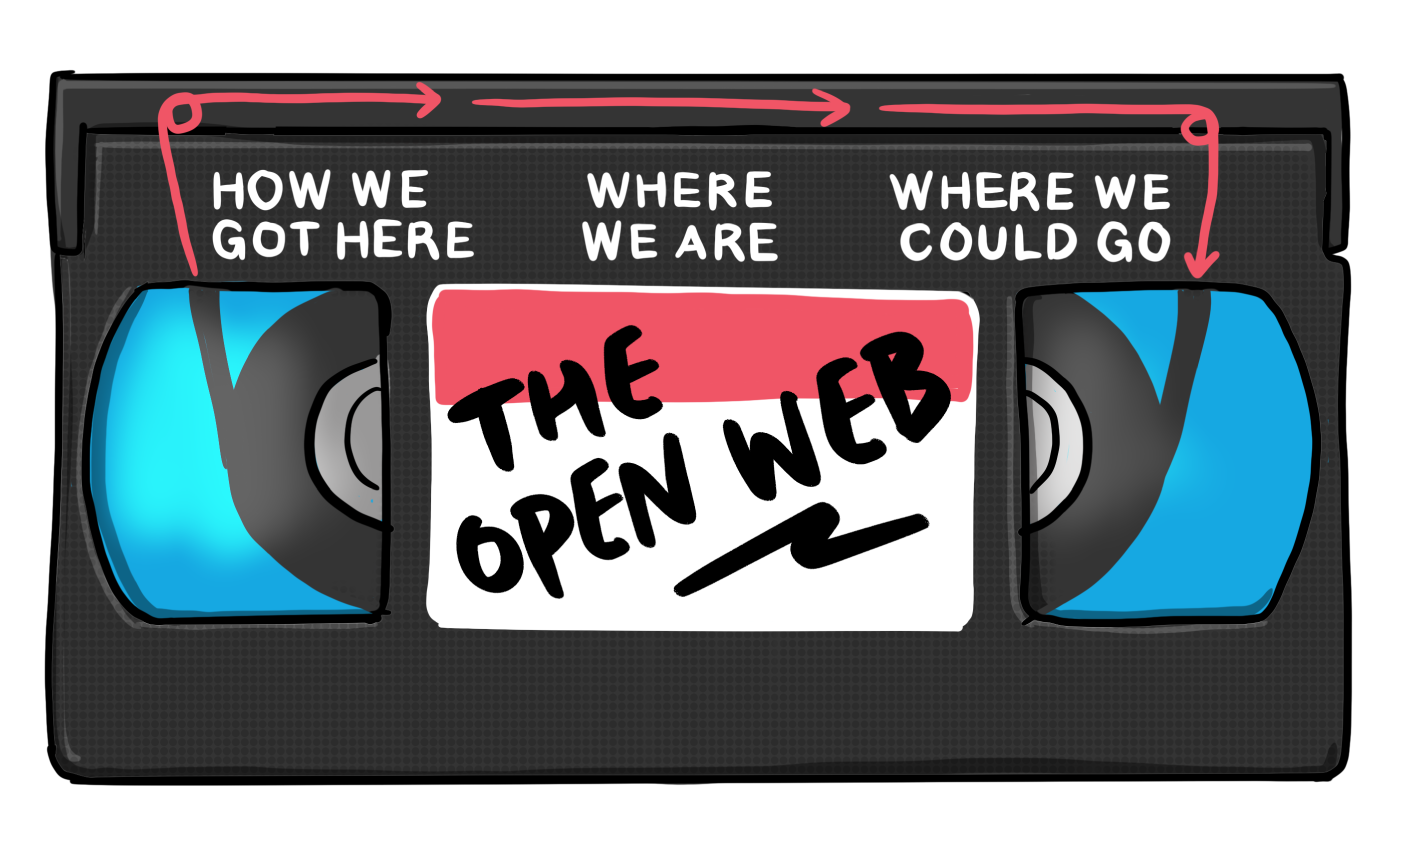 A VHS tape titled "The Open Web". Along the top is written "How we got here", "Where we are", and "Where we could go".